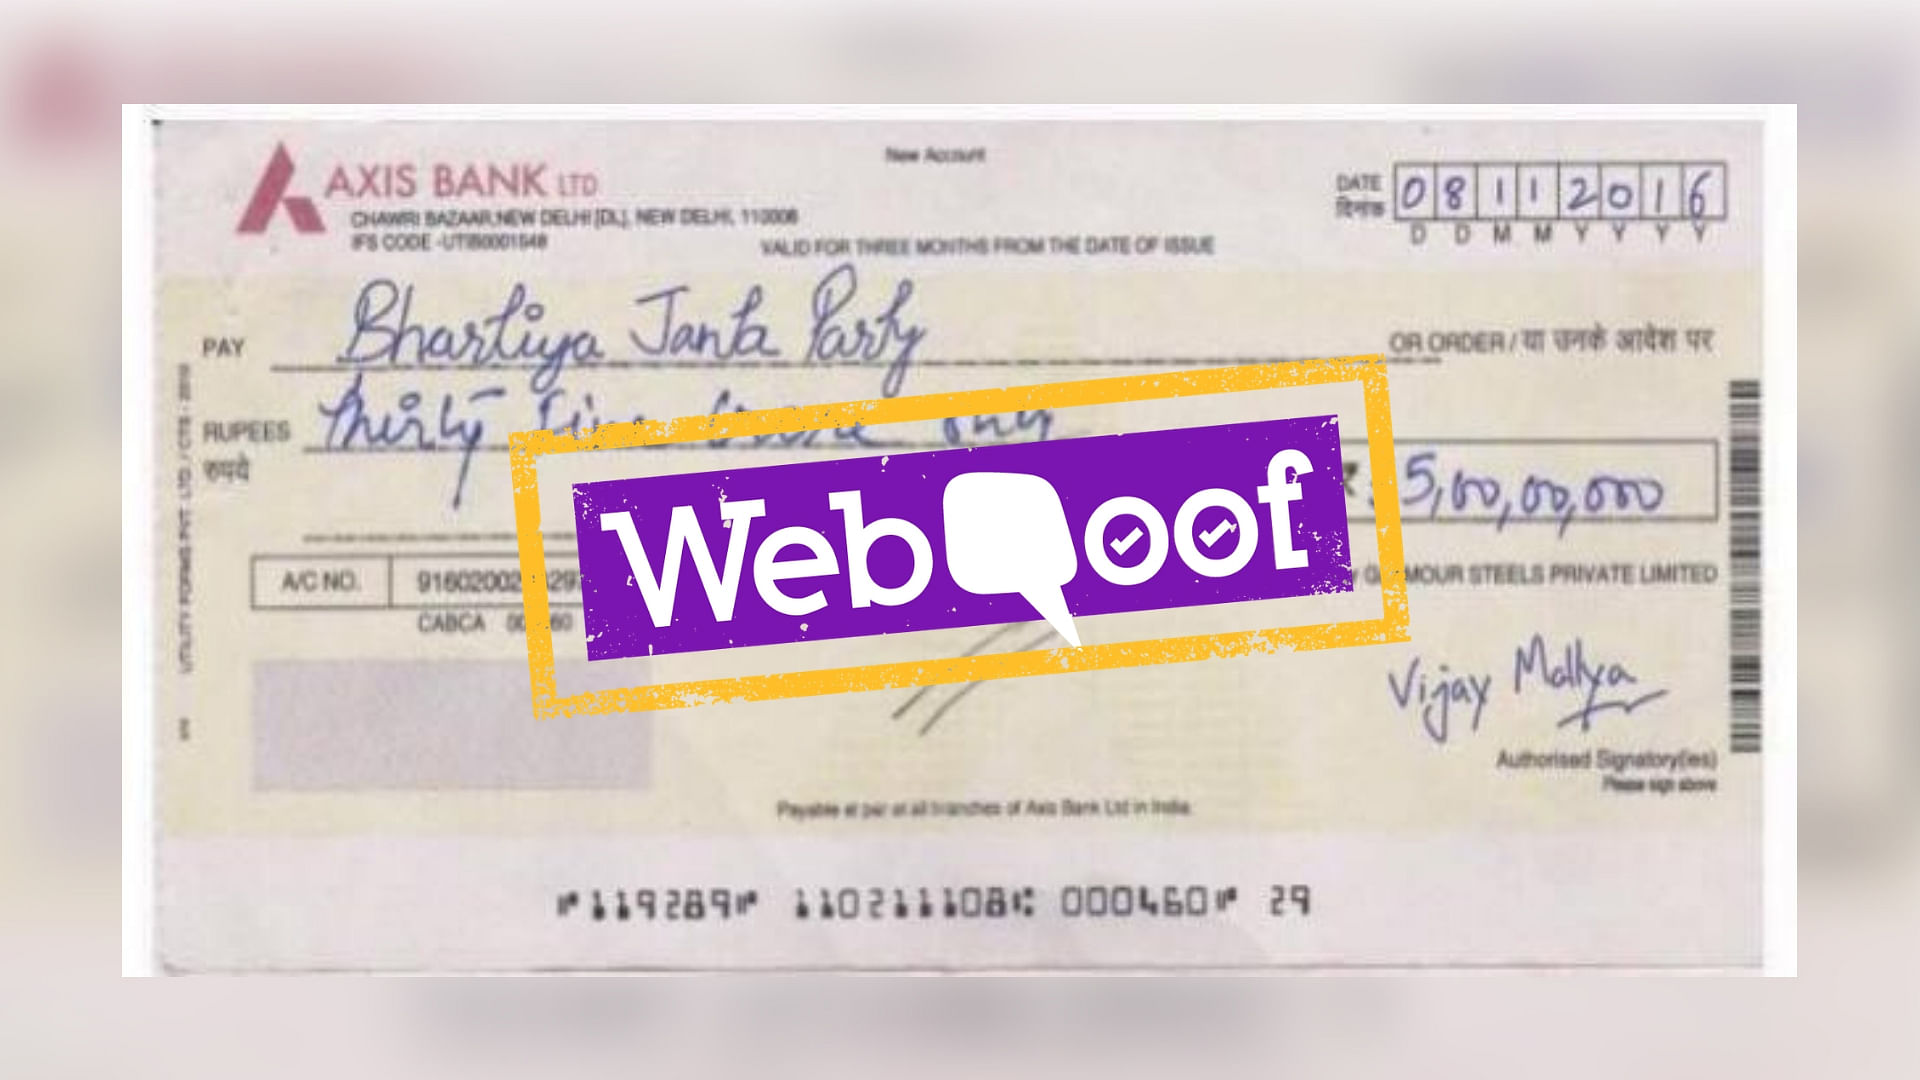 The cheque is a fabricated one and does not belong to Vijay Mallya. &nbsp;